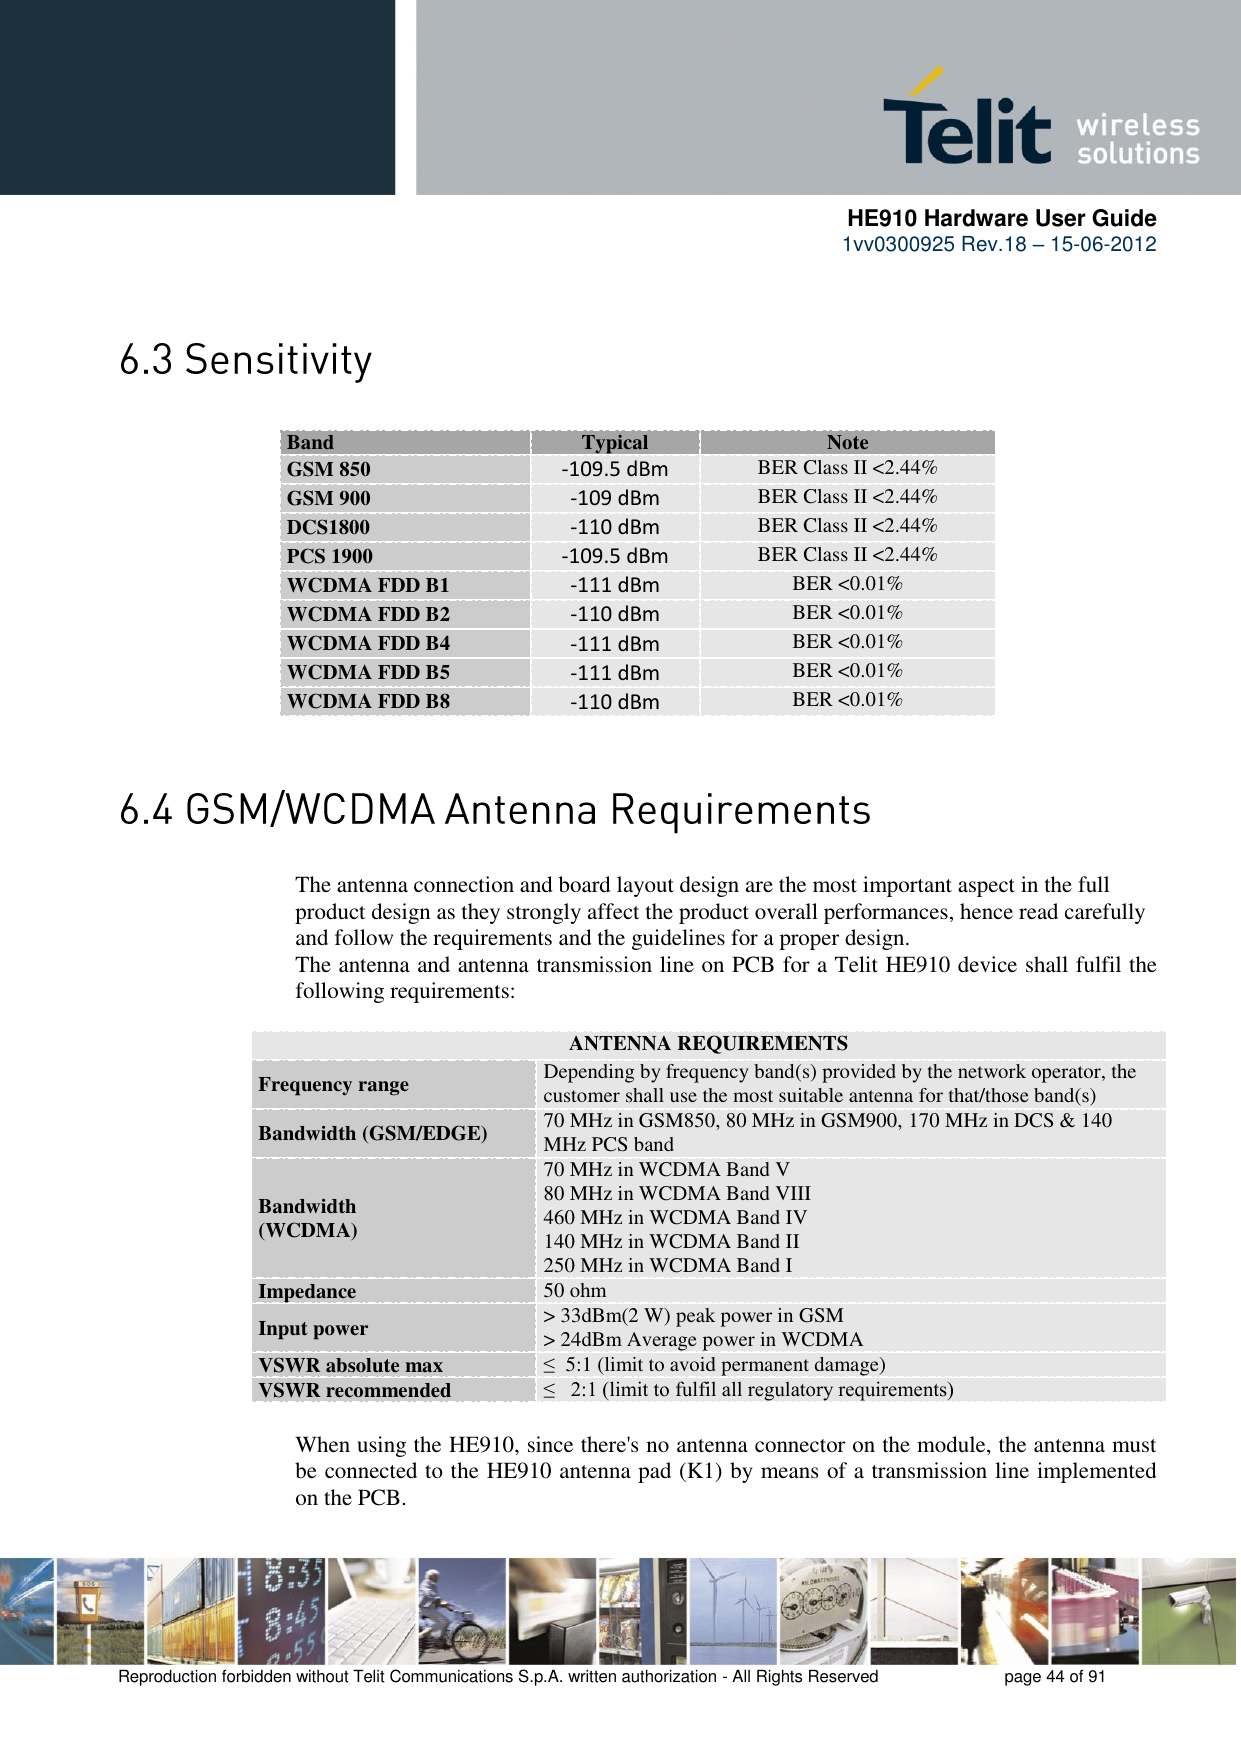      HE910 Hardware User Guide 1vv0300925 Rev.18 – 15-06-2012    Reproduction forbidden without Telit Communications S.p.A. written authorization - All Rights Reserved    page 44 of 91                 The antenna connection and board layout design are the most important aspect in the full product design as they strongly affect the product overall performances, hence read carefully and follow the requirements and the guidelines for a proper design. The antenna and antenna transmission line on PCB for a Telit HE910 device shall fulfil the following requirements:   ANTENNA REQUIREMENTS Frequency range Depending by frequency band(s) provided by the network operator, the customer shall use the most suitable antenna for that/those band(s) Bandwidth (GSM/EDGE) 70 MHz in GSM850, 80 MHz in GSM900, 170 MHz in DCS &amp; 140 MHz PCS band Bandwidth  (WCDMA) 70 MHz in WCDMA Band V 80 MHz in WCDMA Band VIII 460 MHz in WCDMA Band IV  140 MHz in WCDMA Band II 250 MHz in WCDMA Band I Impedance 50 ohm Input power &gt; 33dBm(2 W) peak power in GSM &gt; 24dBm Average power in WCDMA VSWR absolute max ≤  5:1 (limit to avoid permanent damage) VSWR recommended ≤   2:1 (limit to fulfil all regulatory requirements) When using the HE910, since there&apos;s no antenna connector on the module, the antenna must be connected to the HE910 antenna pad (K1) by means of a transmission line implemented on the PCB.  Band Typical Note GSM 850 -109.5 dBm BER Class II &lt;2.44% GSM 900 -109 dBm BER Class II &lt;2.44% DCS1800 -110 dBm BER Class II &lt;2.44% PCS 1900 -109.5 dBm BER Class II &lt;2.44% WCDMA FDD B1 -111 dBm BER &lt;0.01% WCDMA FDD B2 -110 dBm BER &lt;0.01% WCDMA FDD B4 -111 dBm BER &lt;0.01% WCDMA FDD B5 -111 dBm BER &lt;0.01% WCDMA FDD B8 -110 dBm BER &lt;0.01% 